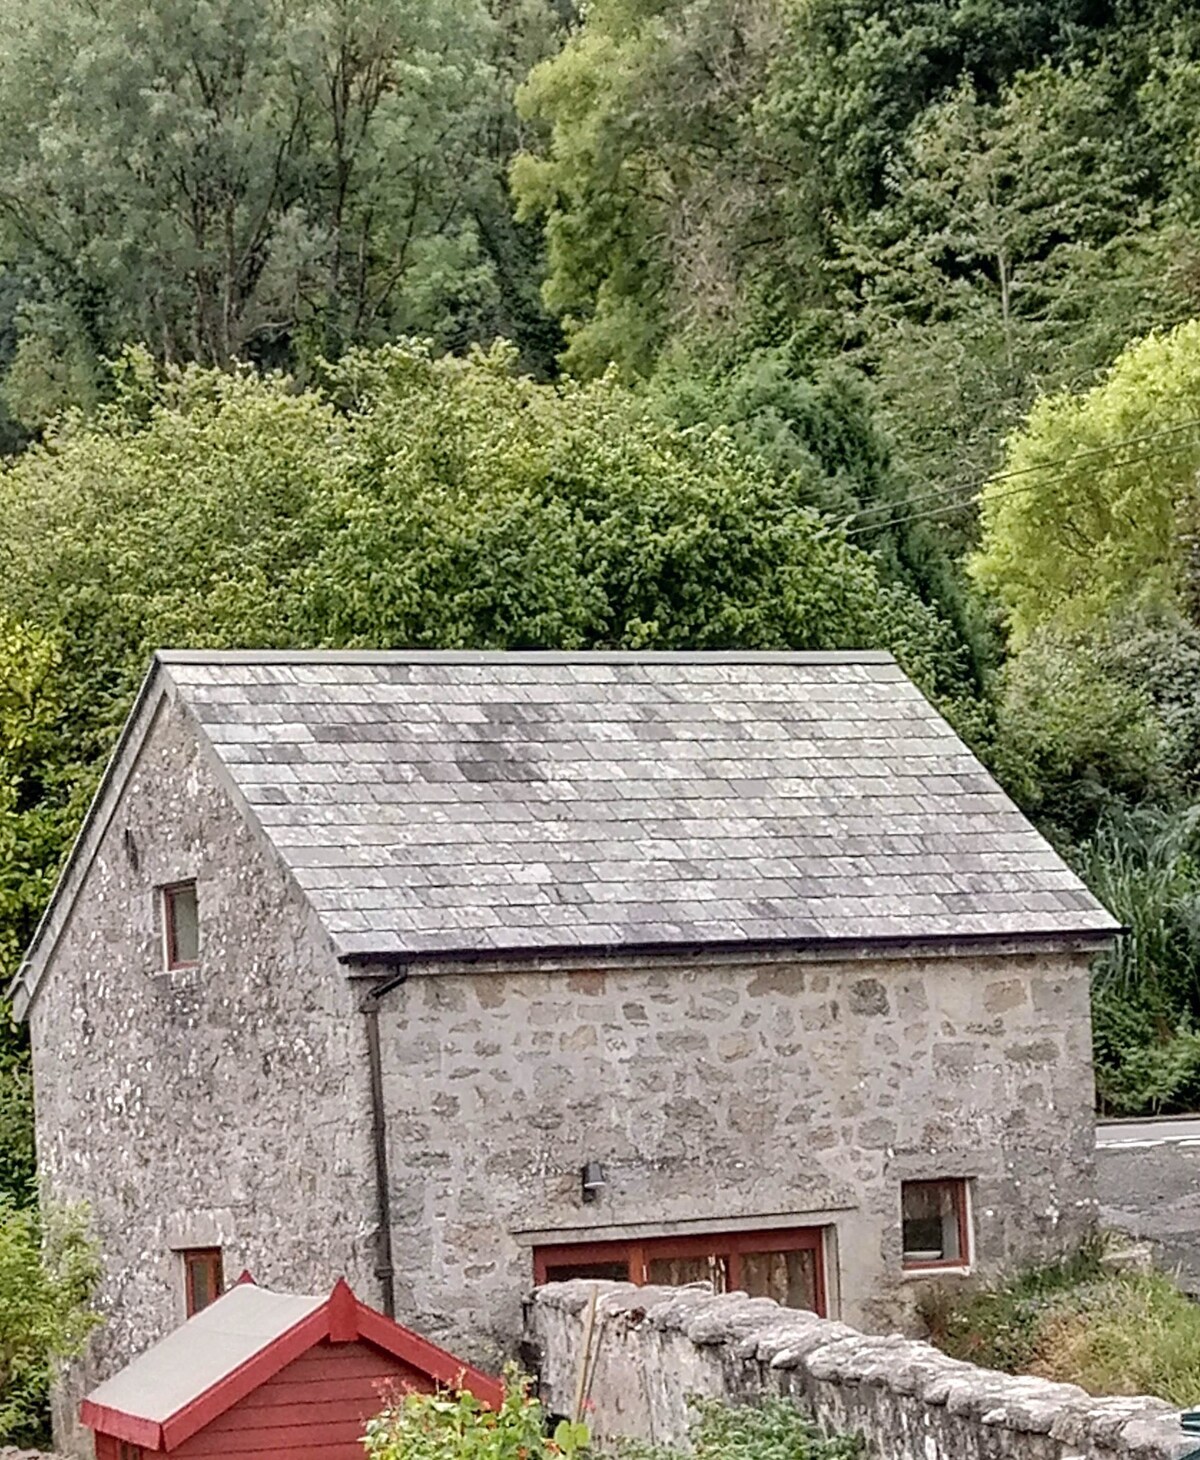 Lovely conversion of old barn!